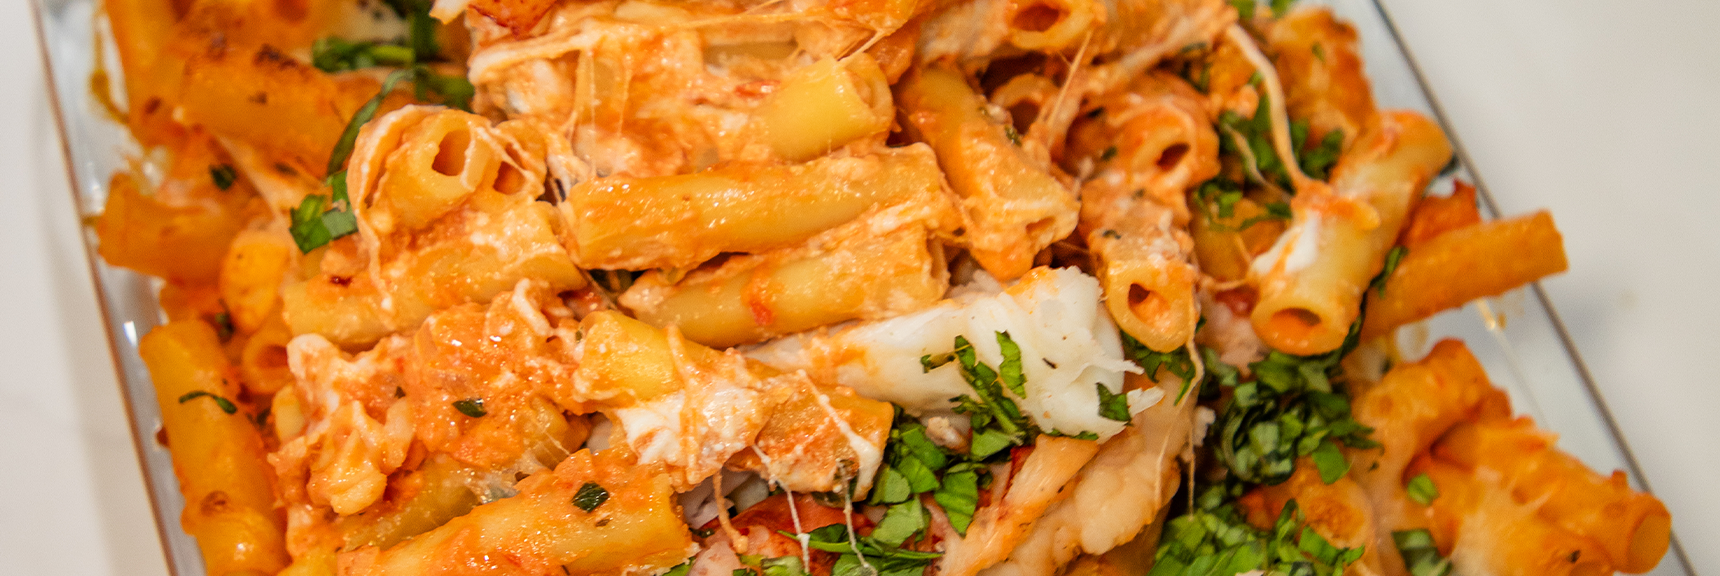 Baked Ziti Alla Vodka With Air-Fried Maine Lobster Tail recipe image